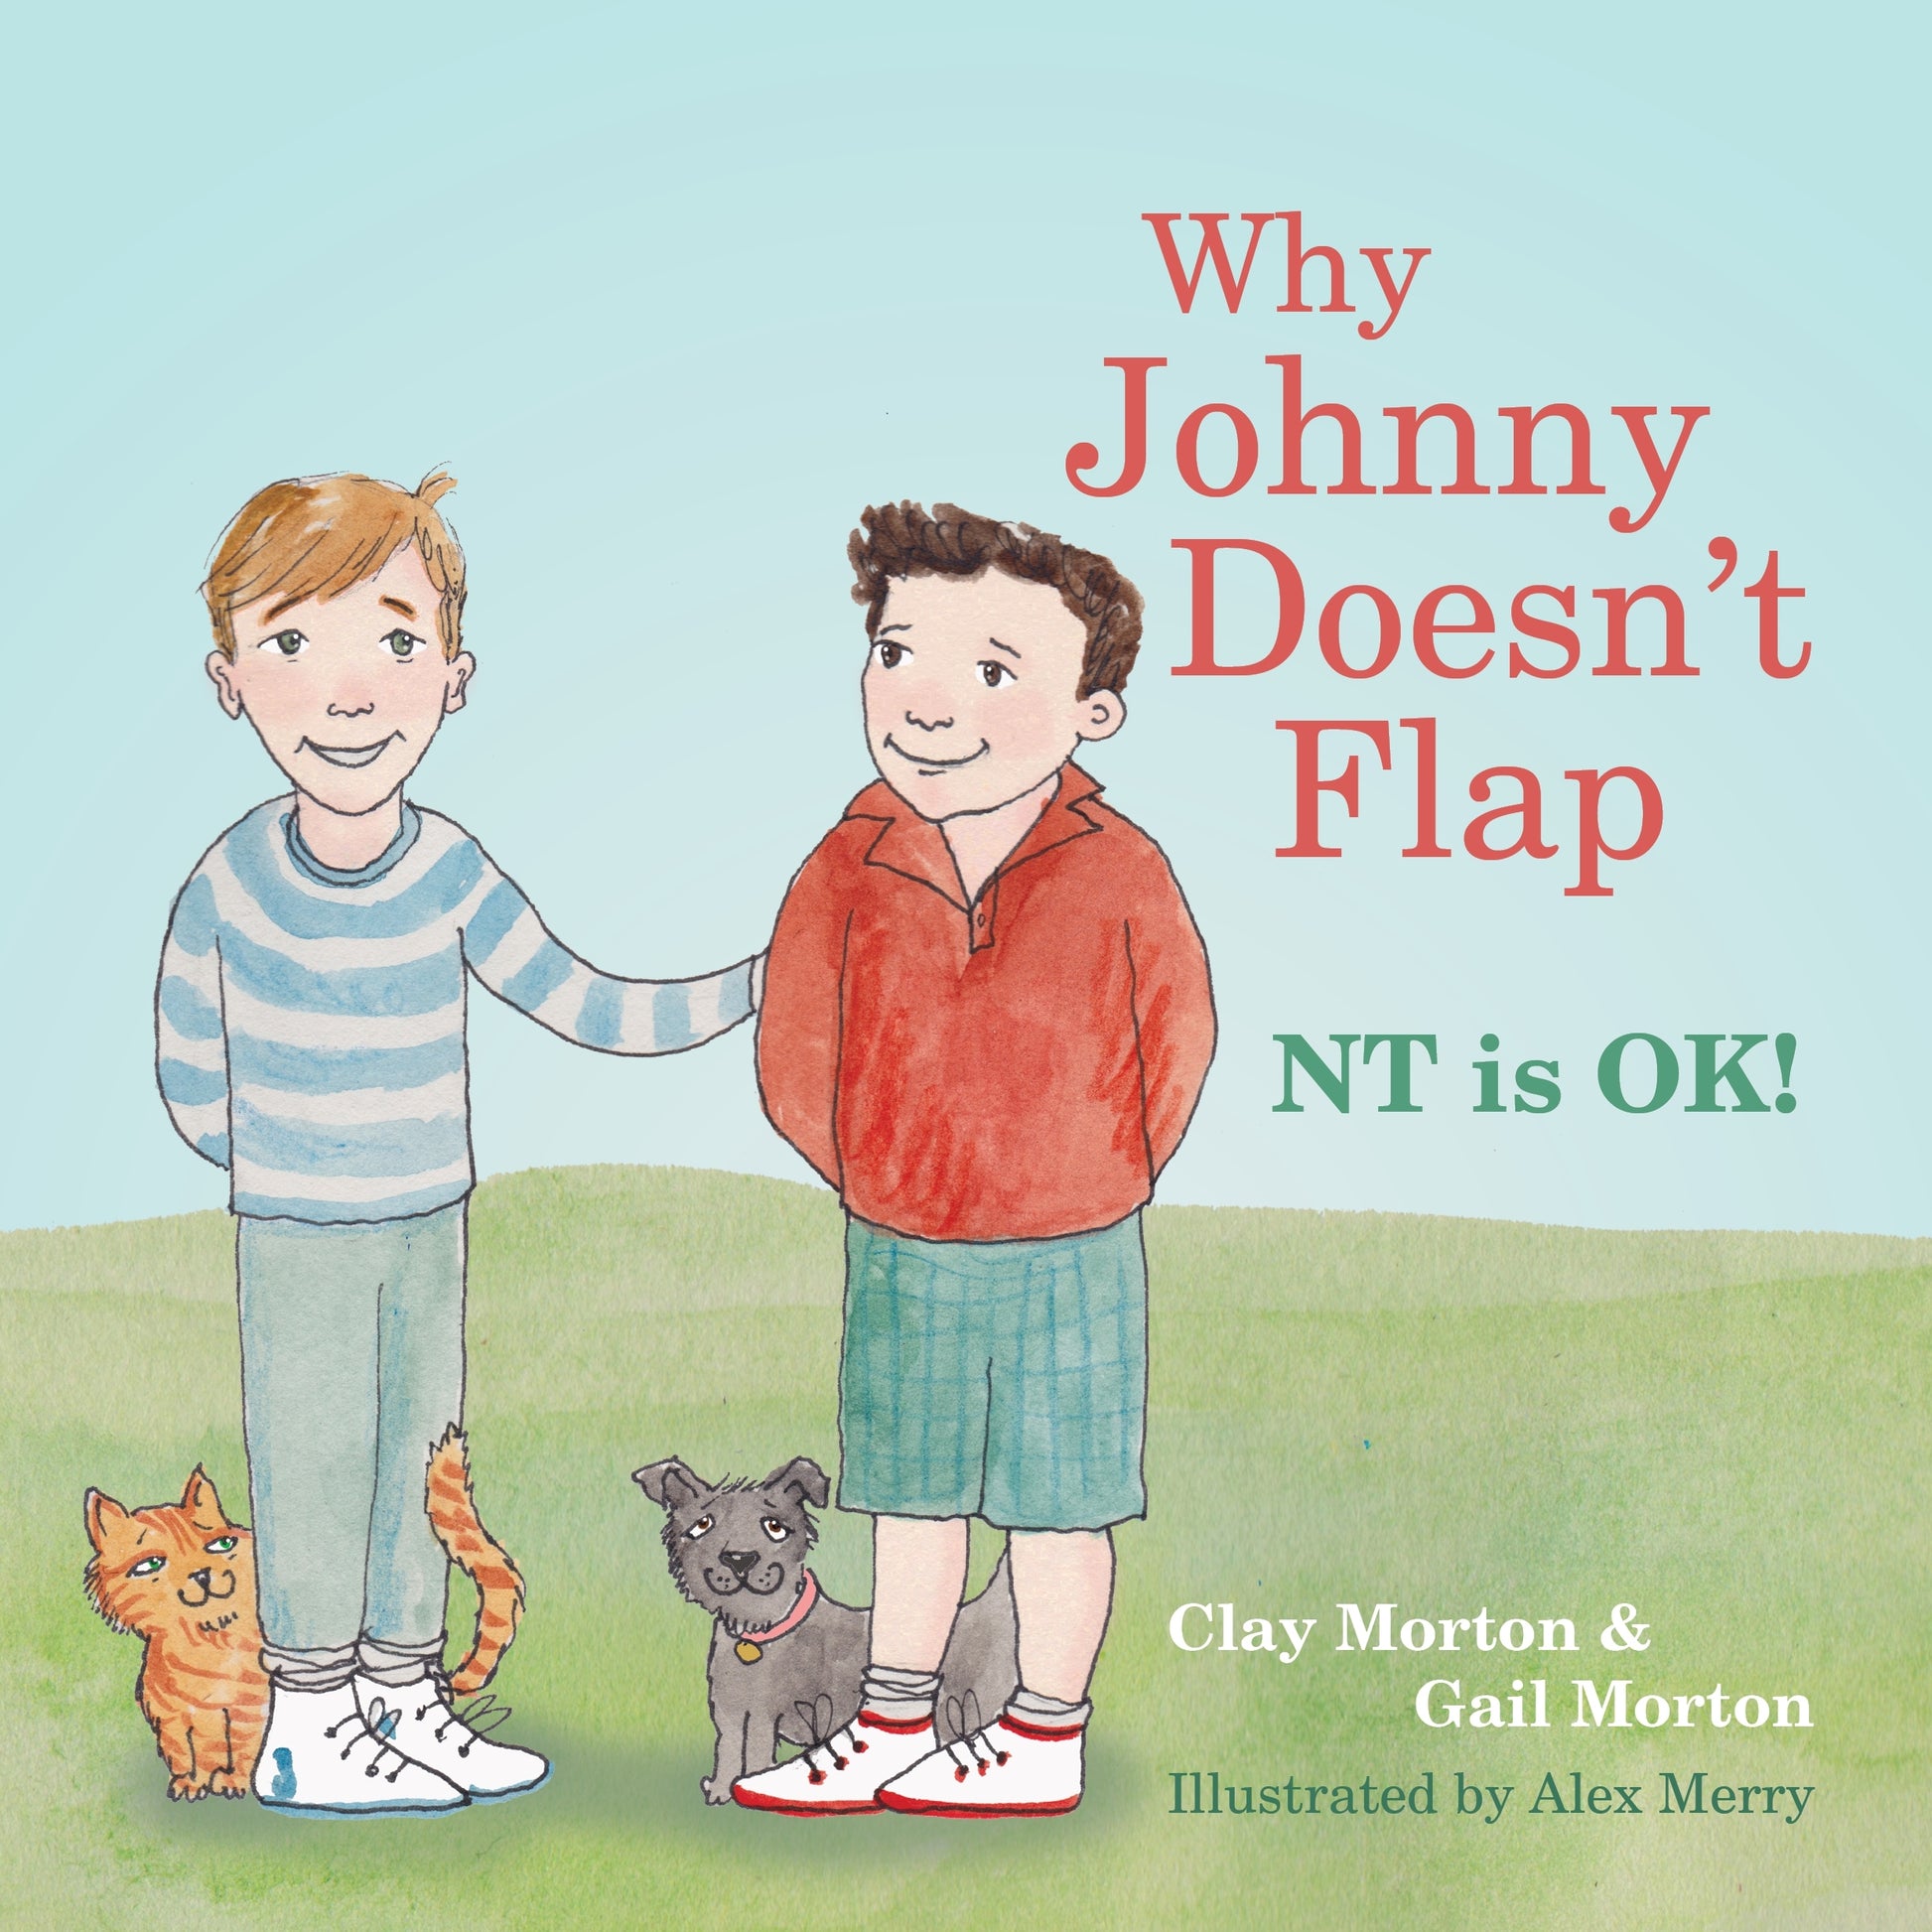 Why Johnny Doesn't Flap by Clay Morton, Gail Morton, Alex Merry